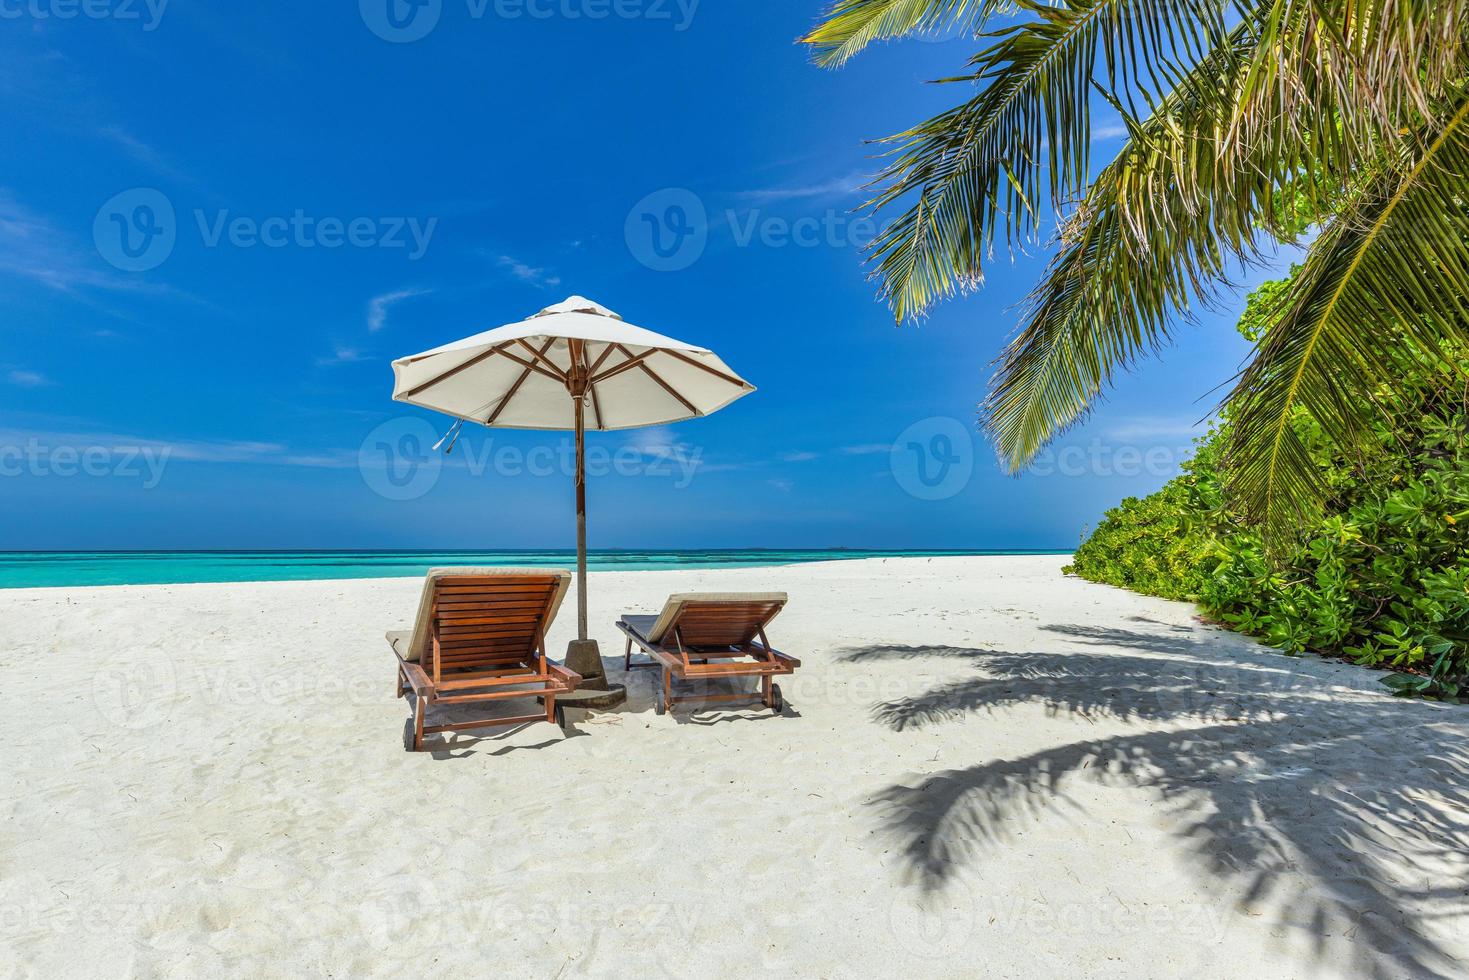 Beautiful tropical landscape, couple chairs sun beds umbrella under palm leaves. Summer background, exotic travel beach, sunny day paradise coast. Amazing landscape, sea sand sky relax resort vacation photo